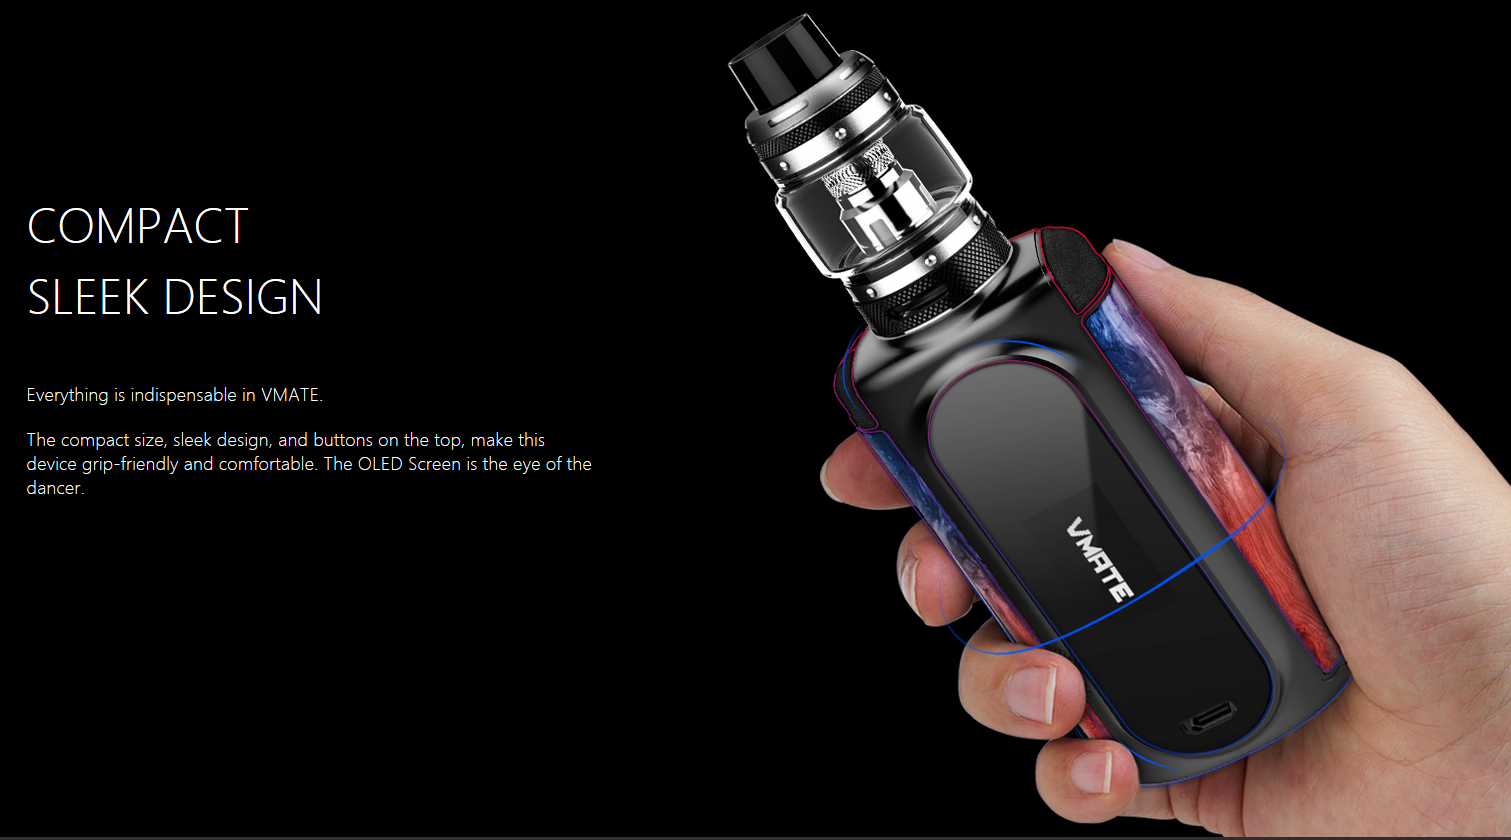 VOOPOO Vmate Kit 200W With UFORCE T1 Tank Compact Sleek Design